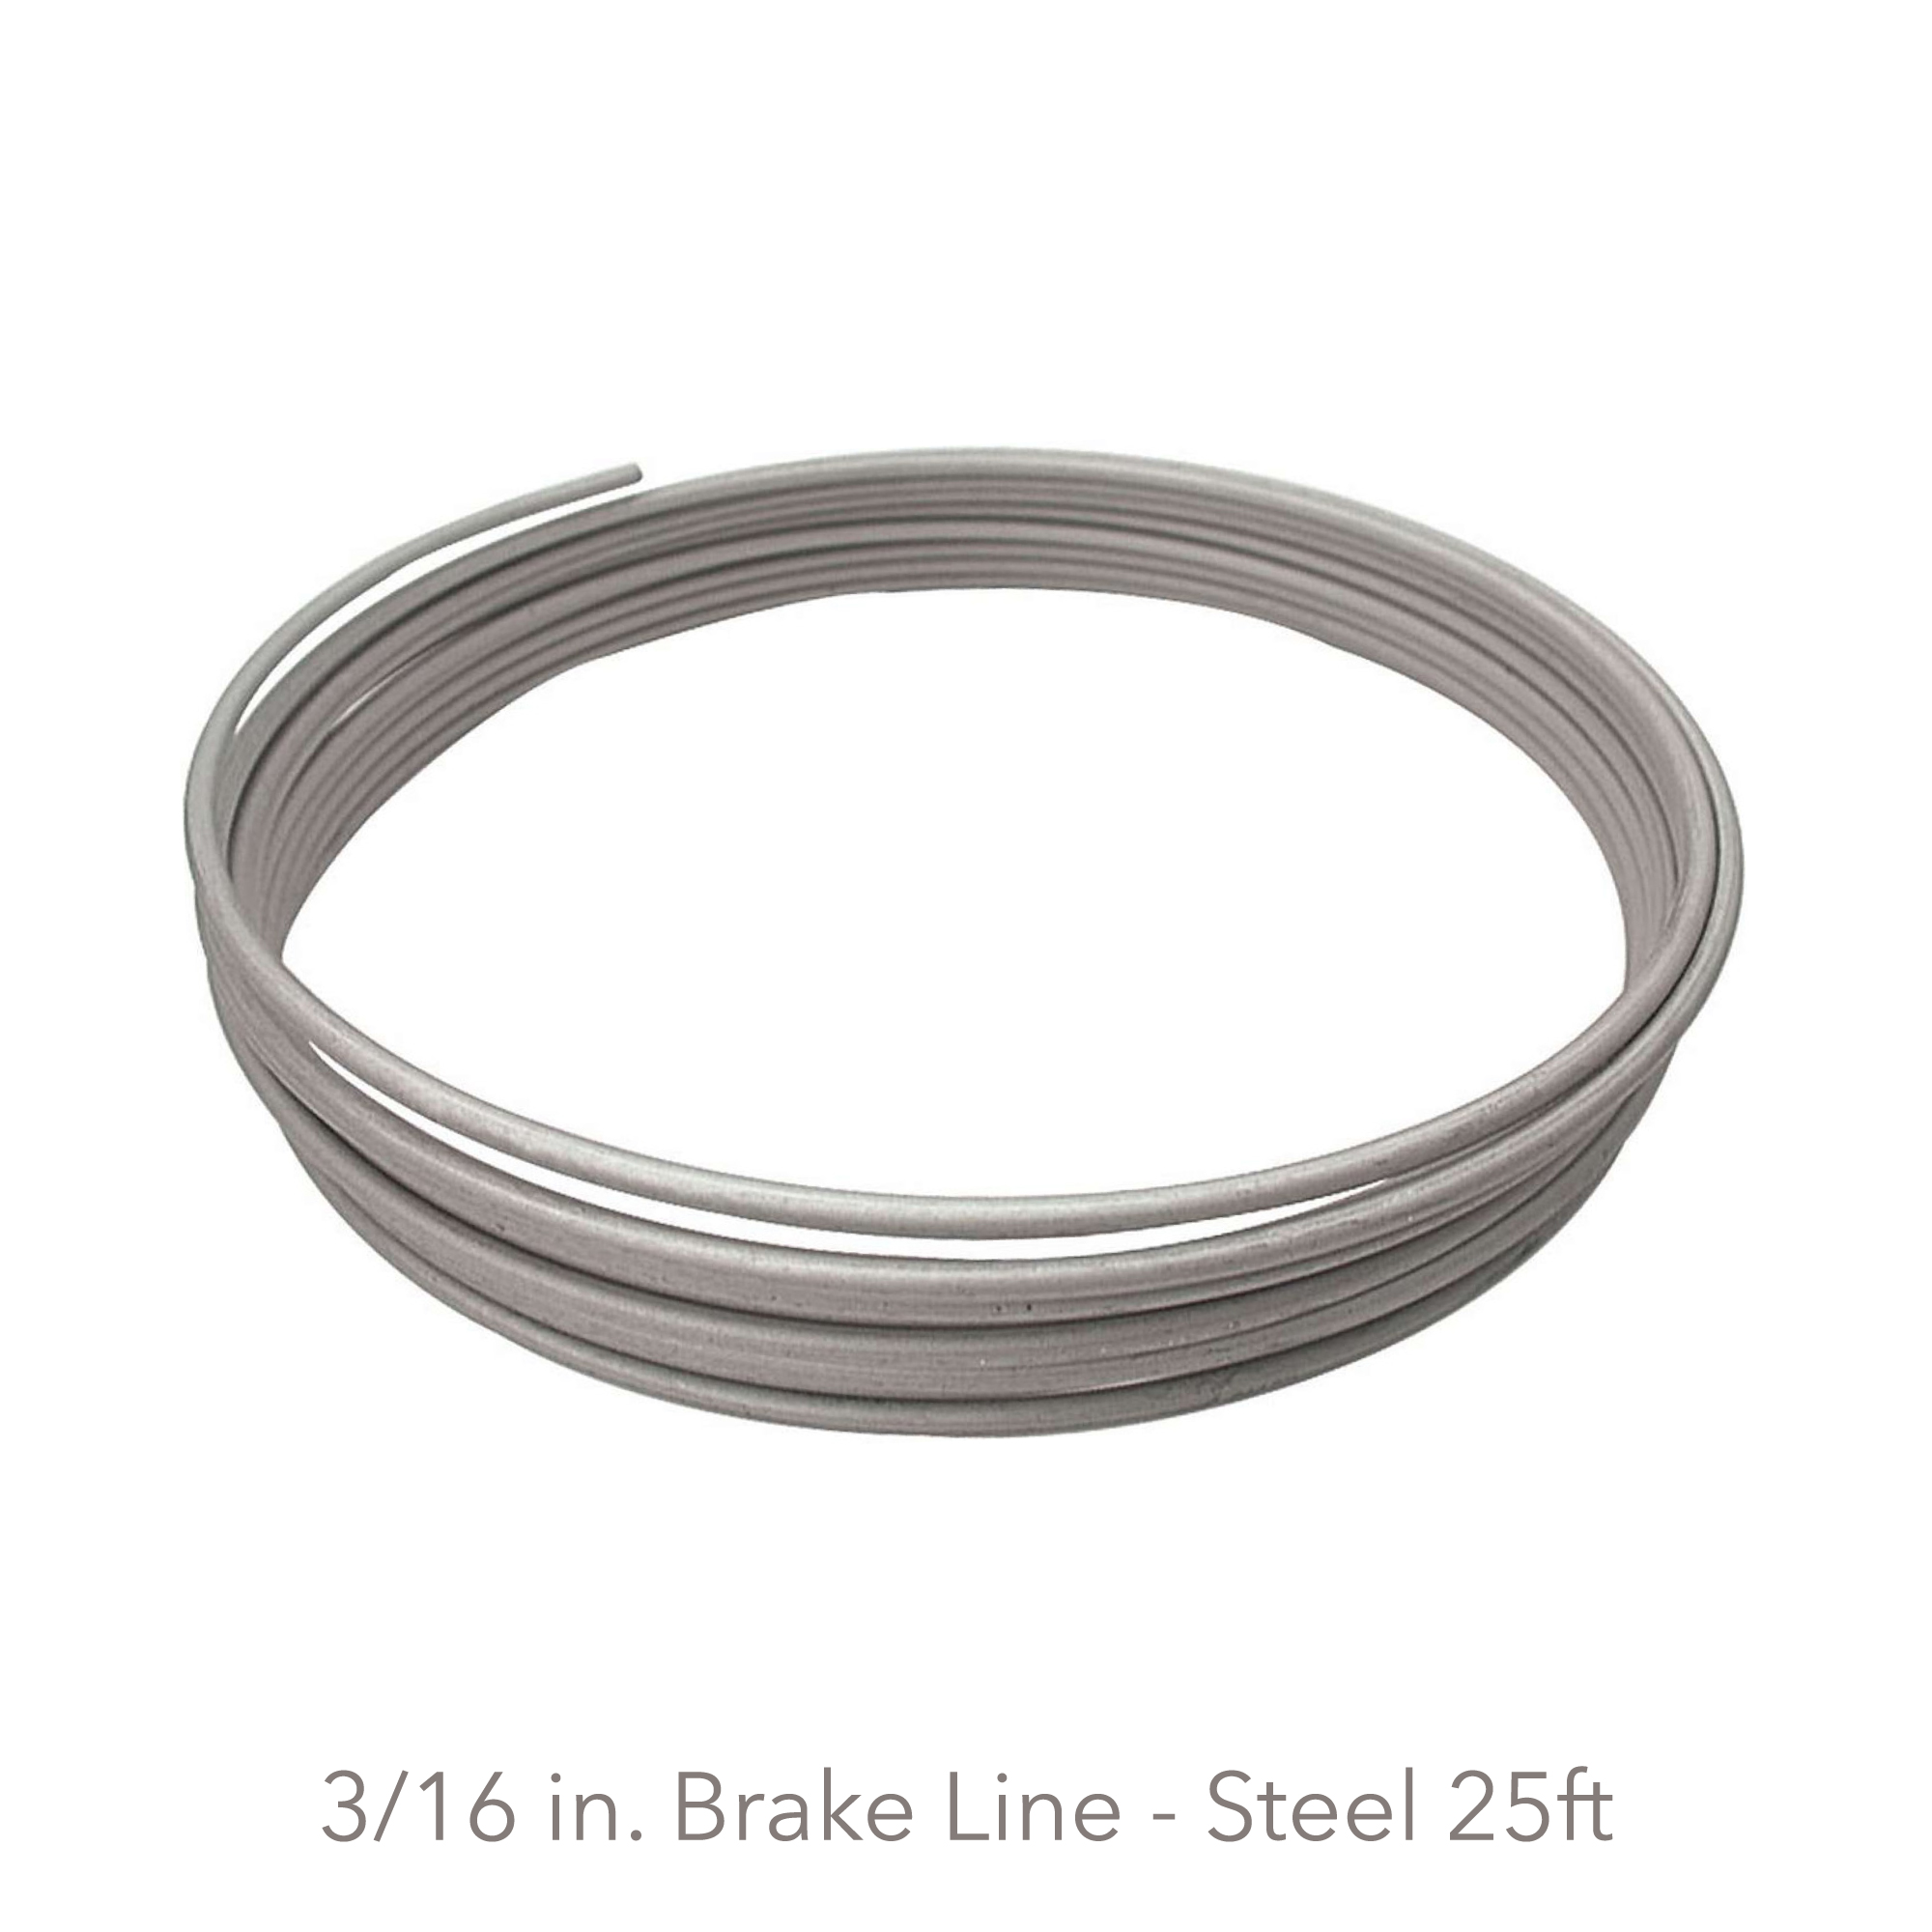 Allstar Brake Line, 25ft Coiled Hard Line - JOES Racing Products